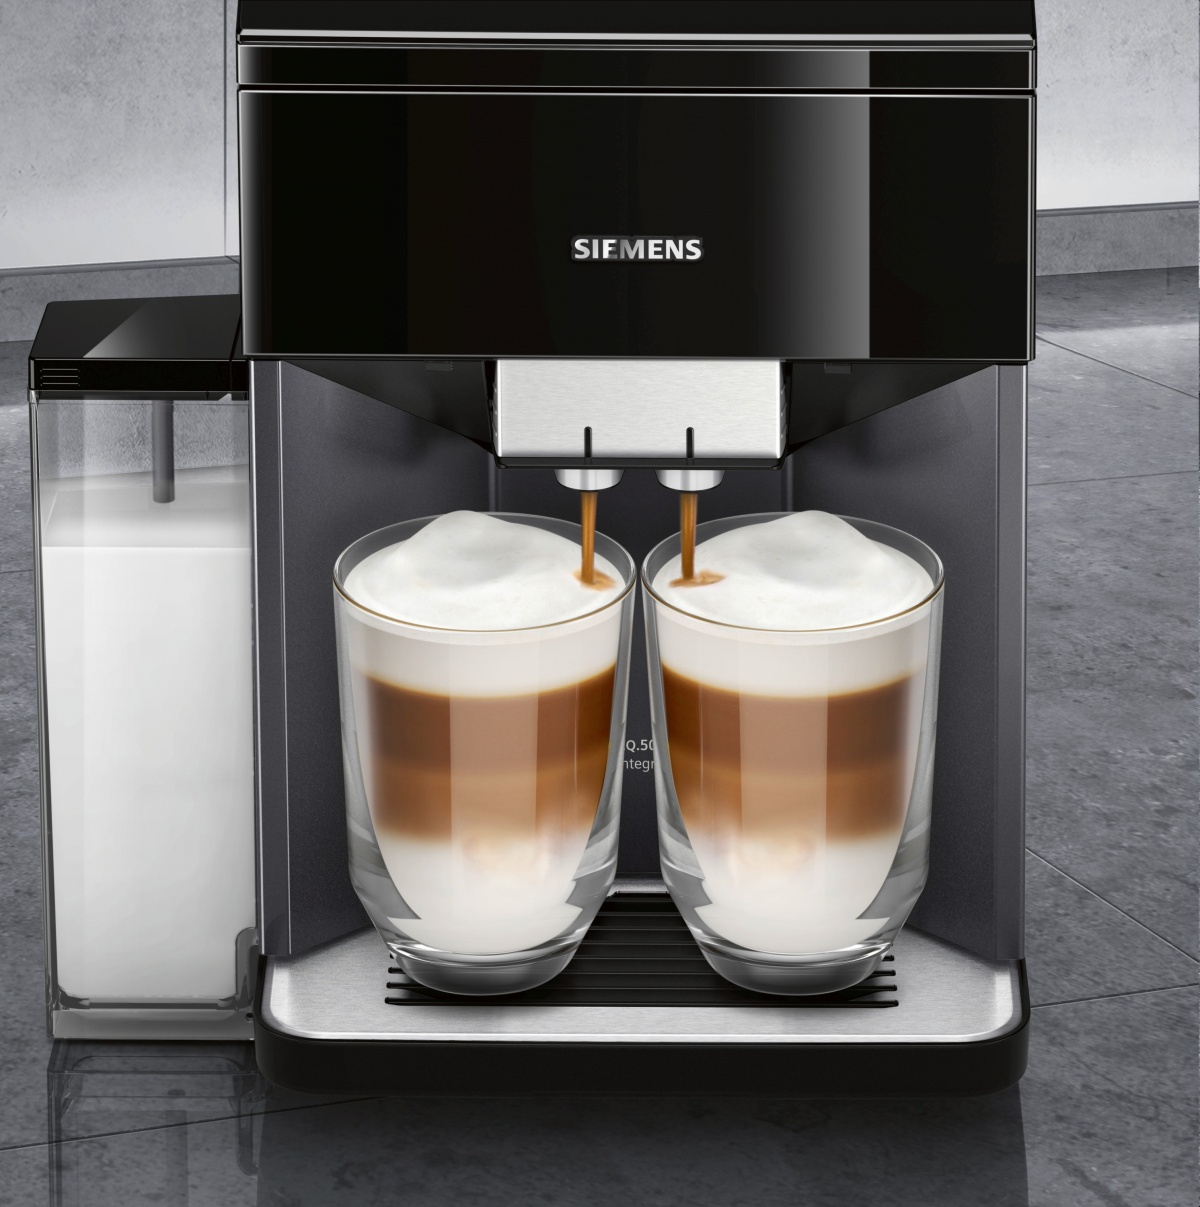 New fully automatic coffee machine EQ.500 integral from Siemens -  Bean2cup.org